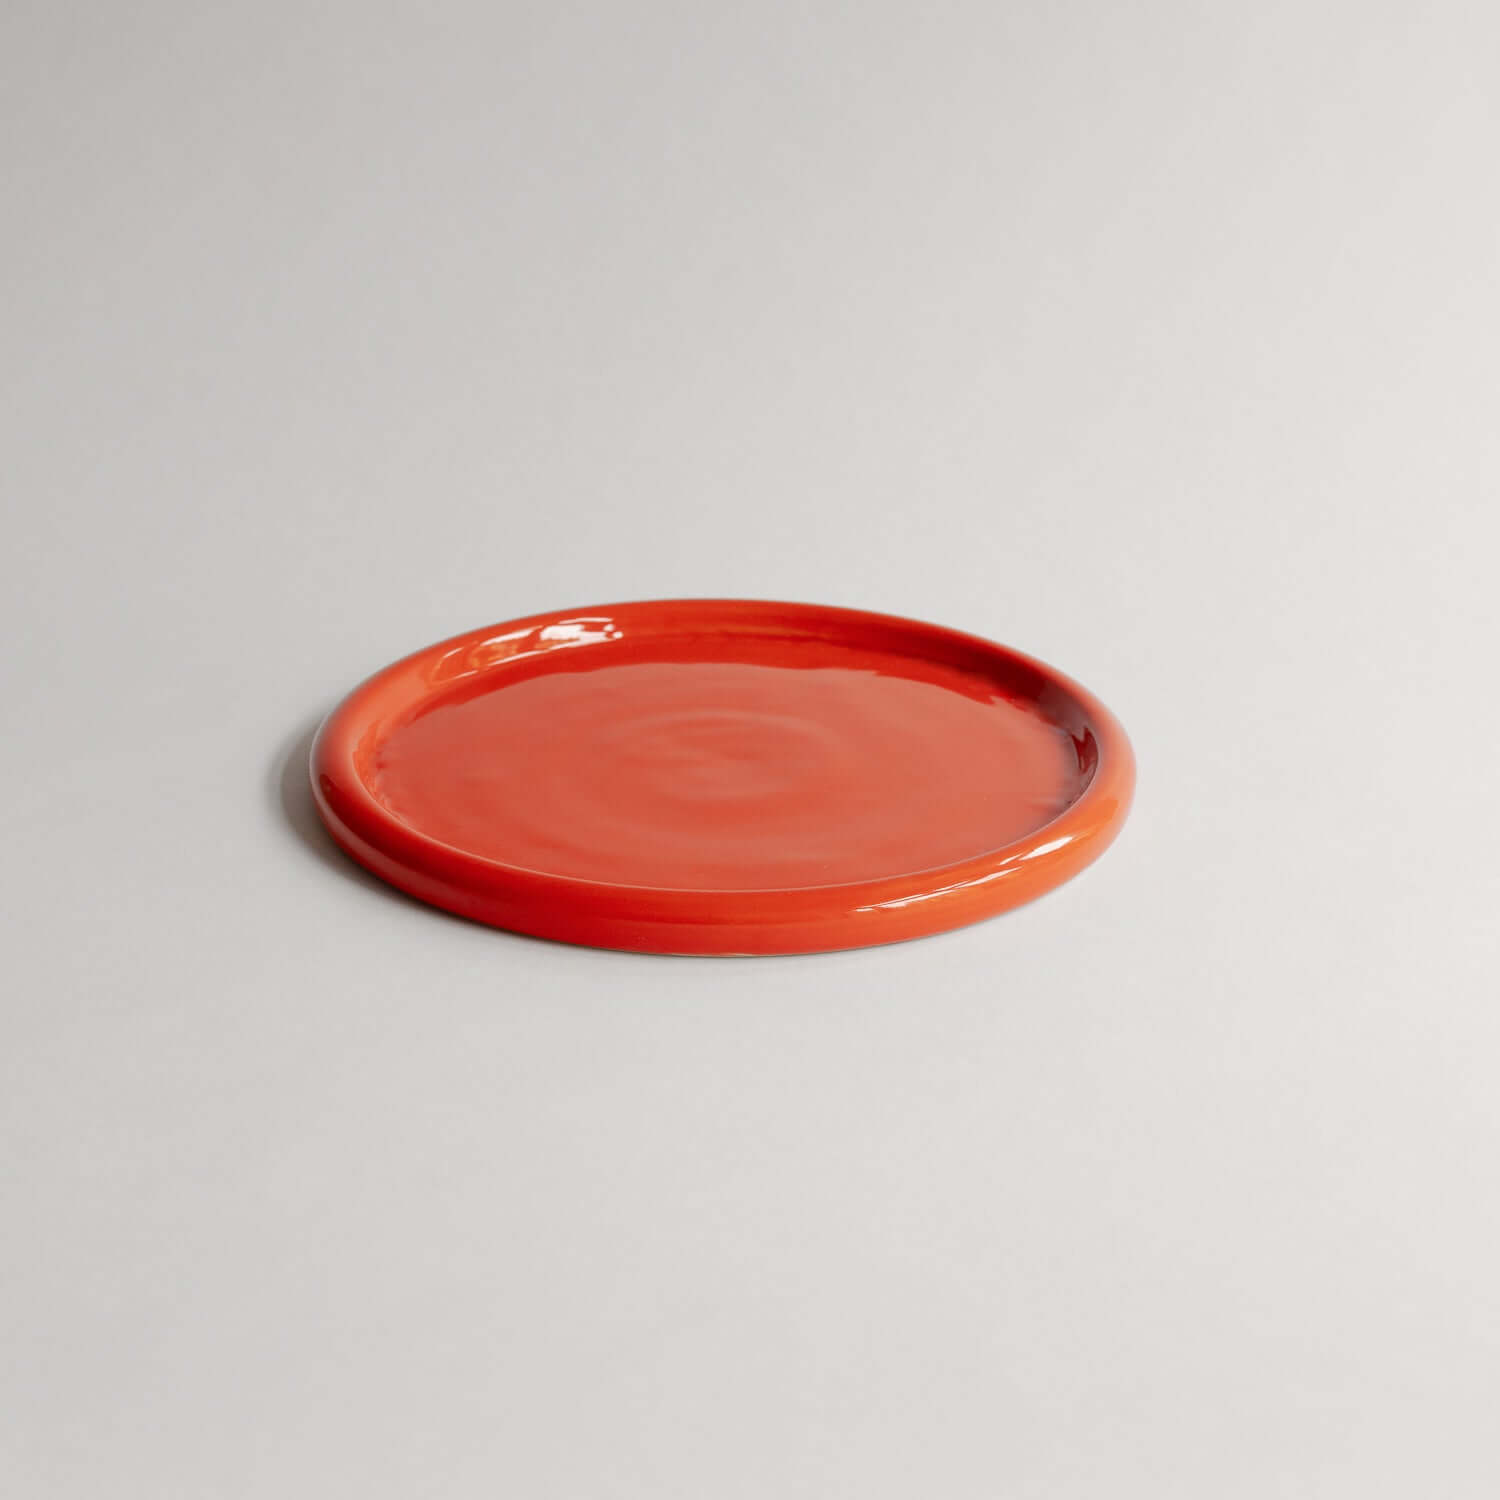 Aleah PlateDiameter — 19 cmHeight — 1,5 cm The Aleah Plate Set includes a red and creme plate, perfect for adding a touch of color to your table setting. Crafted from durable grey stoneware clay and coated with food safe glazes, this piece boasts a fully